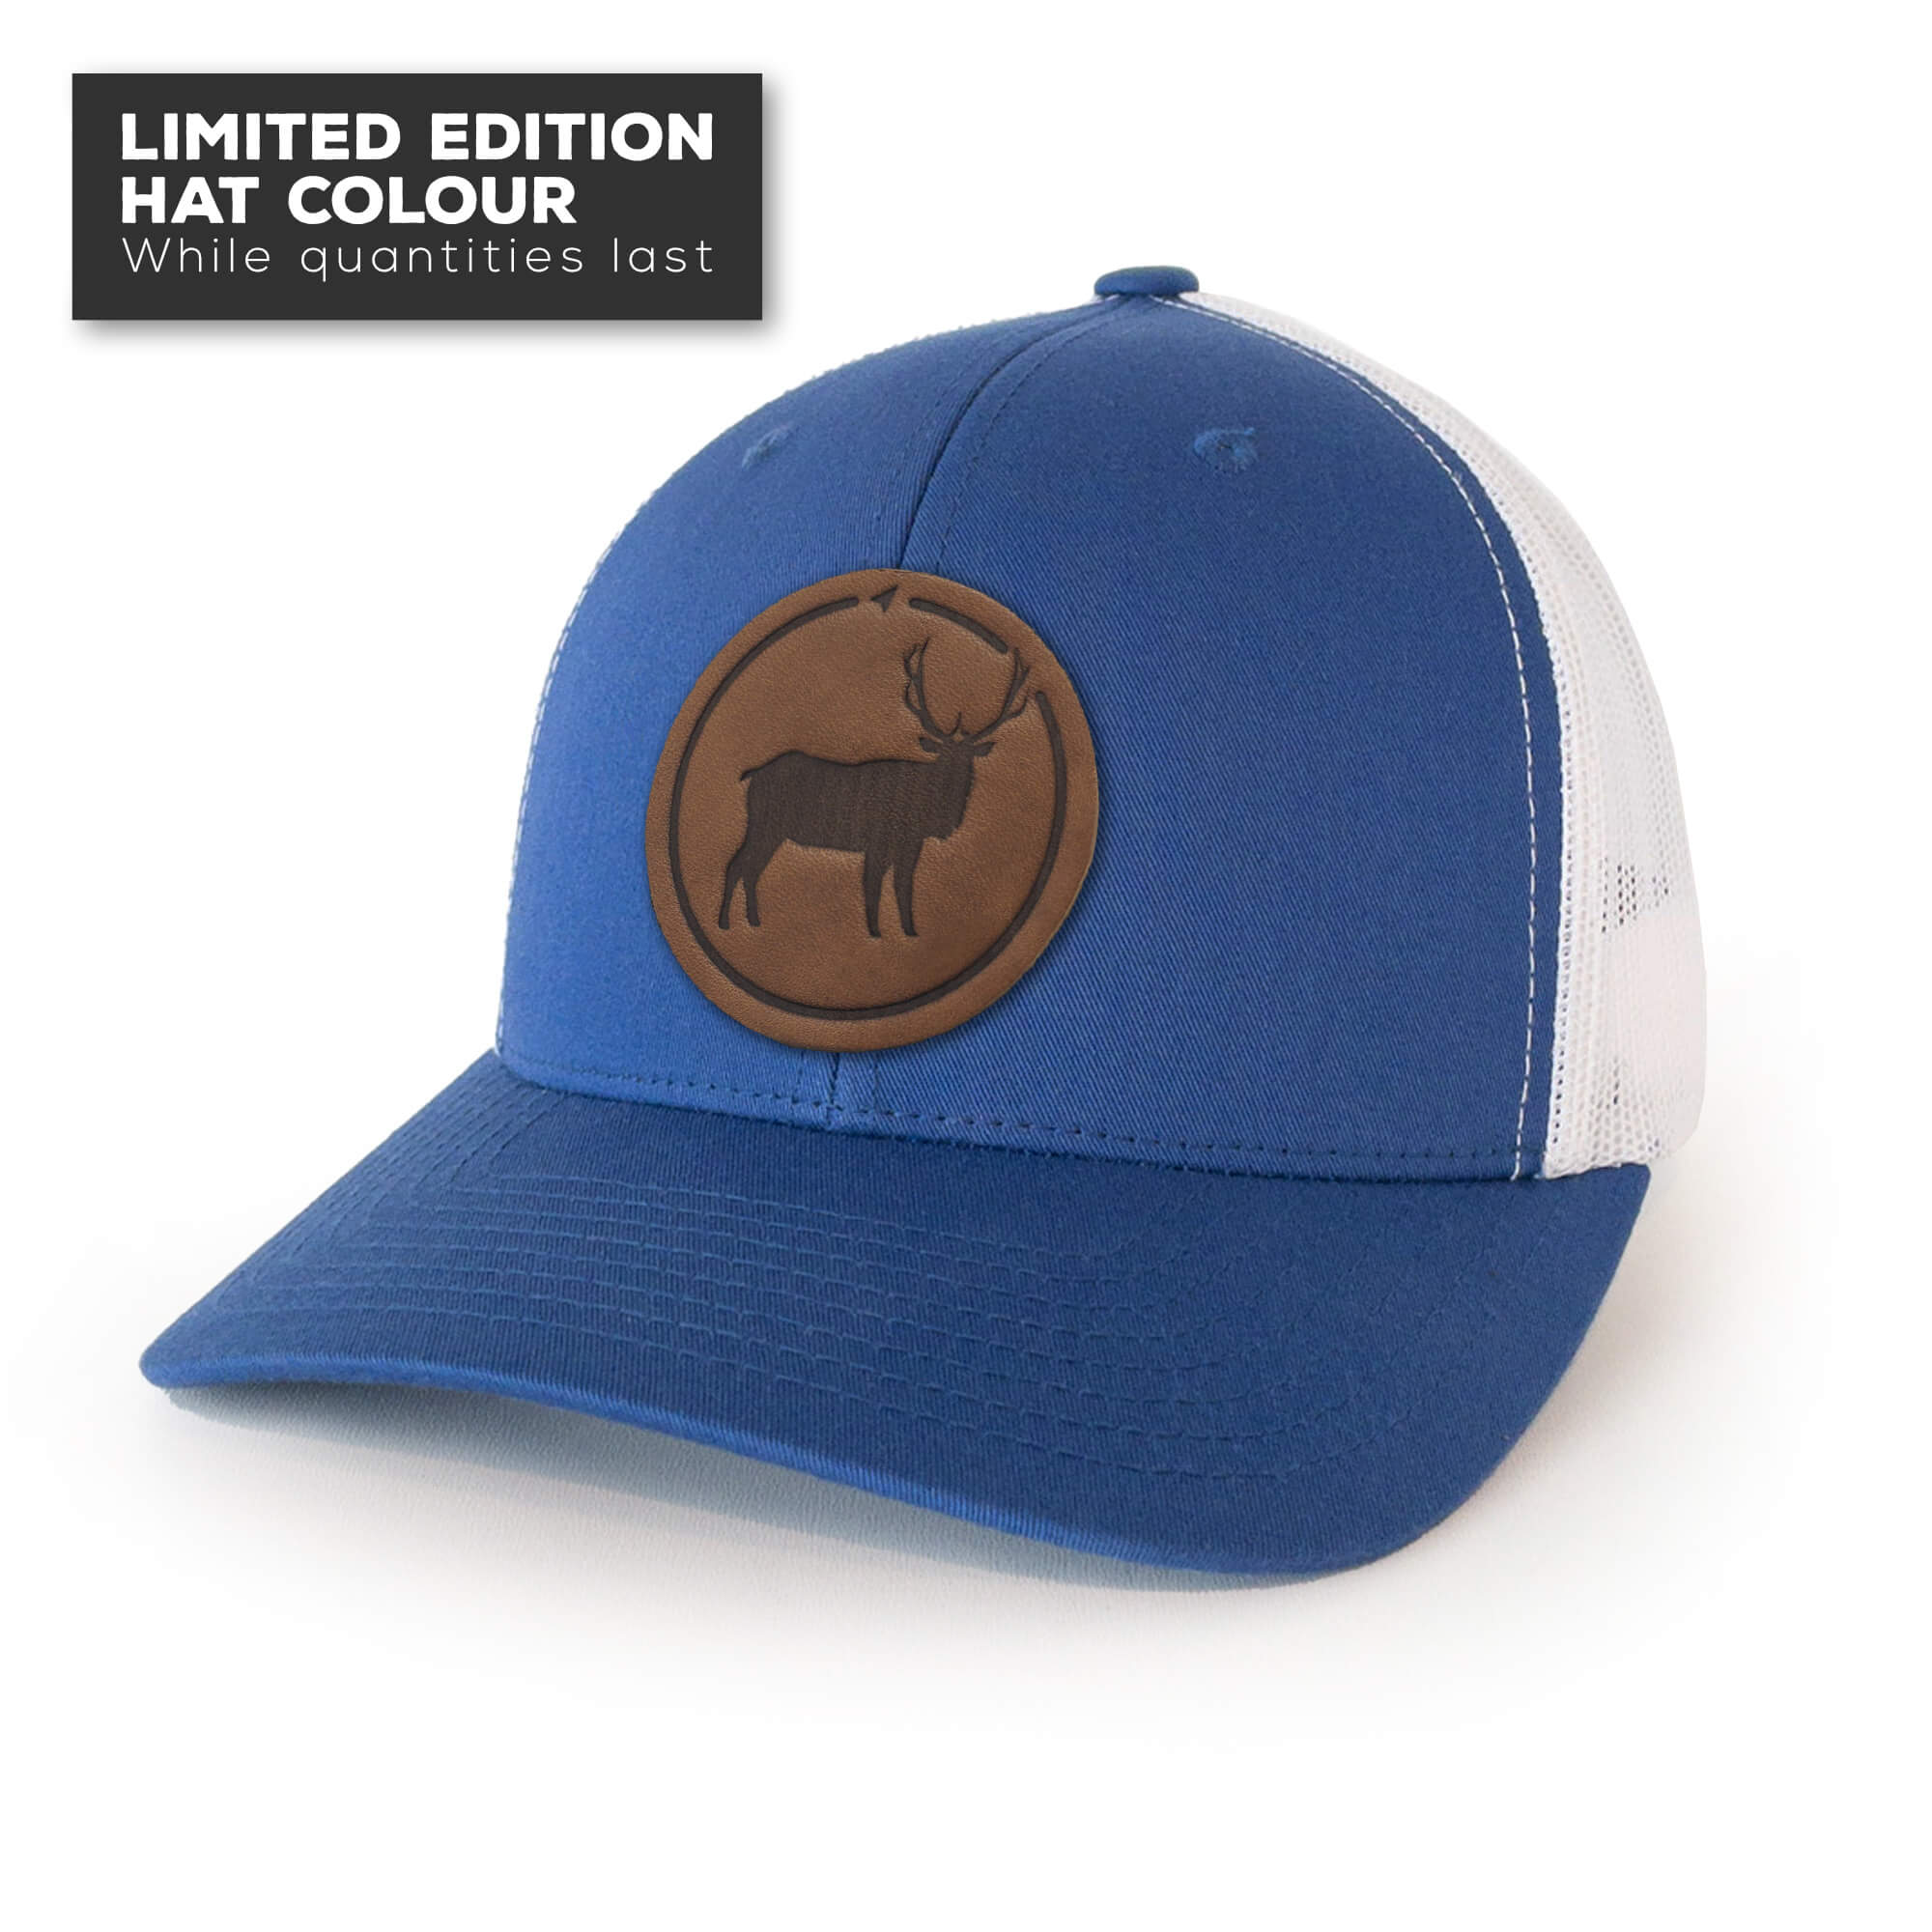 Royal Blue trucker hat with full-grain leather patch of Elk